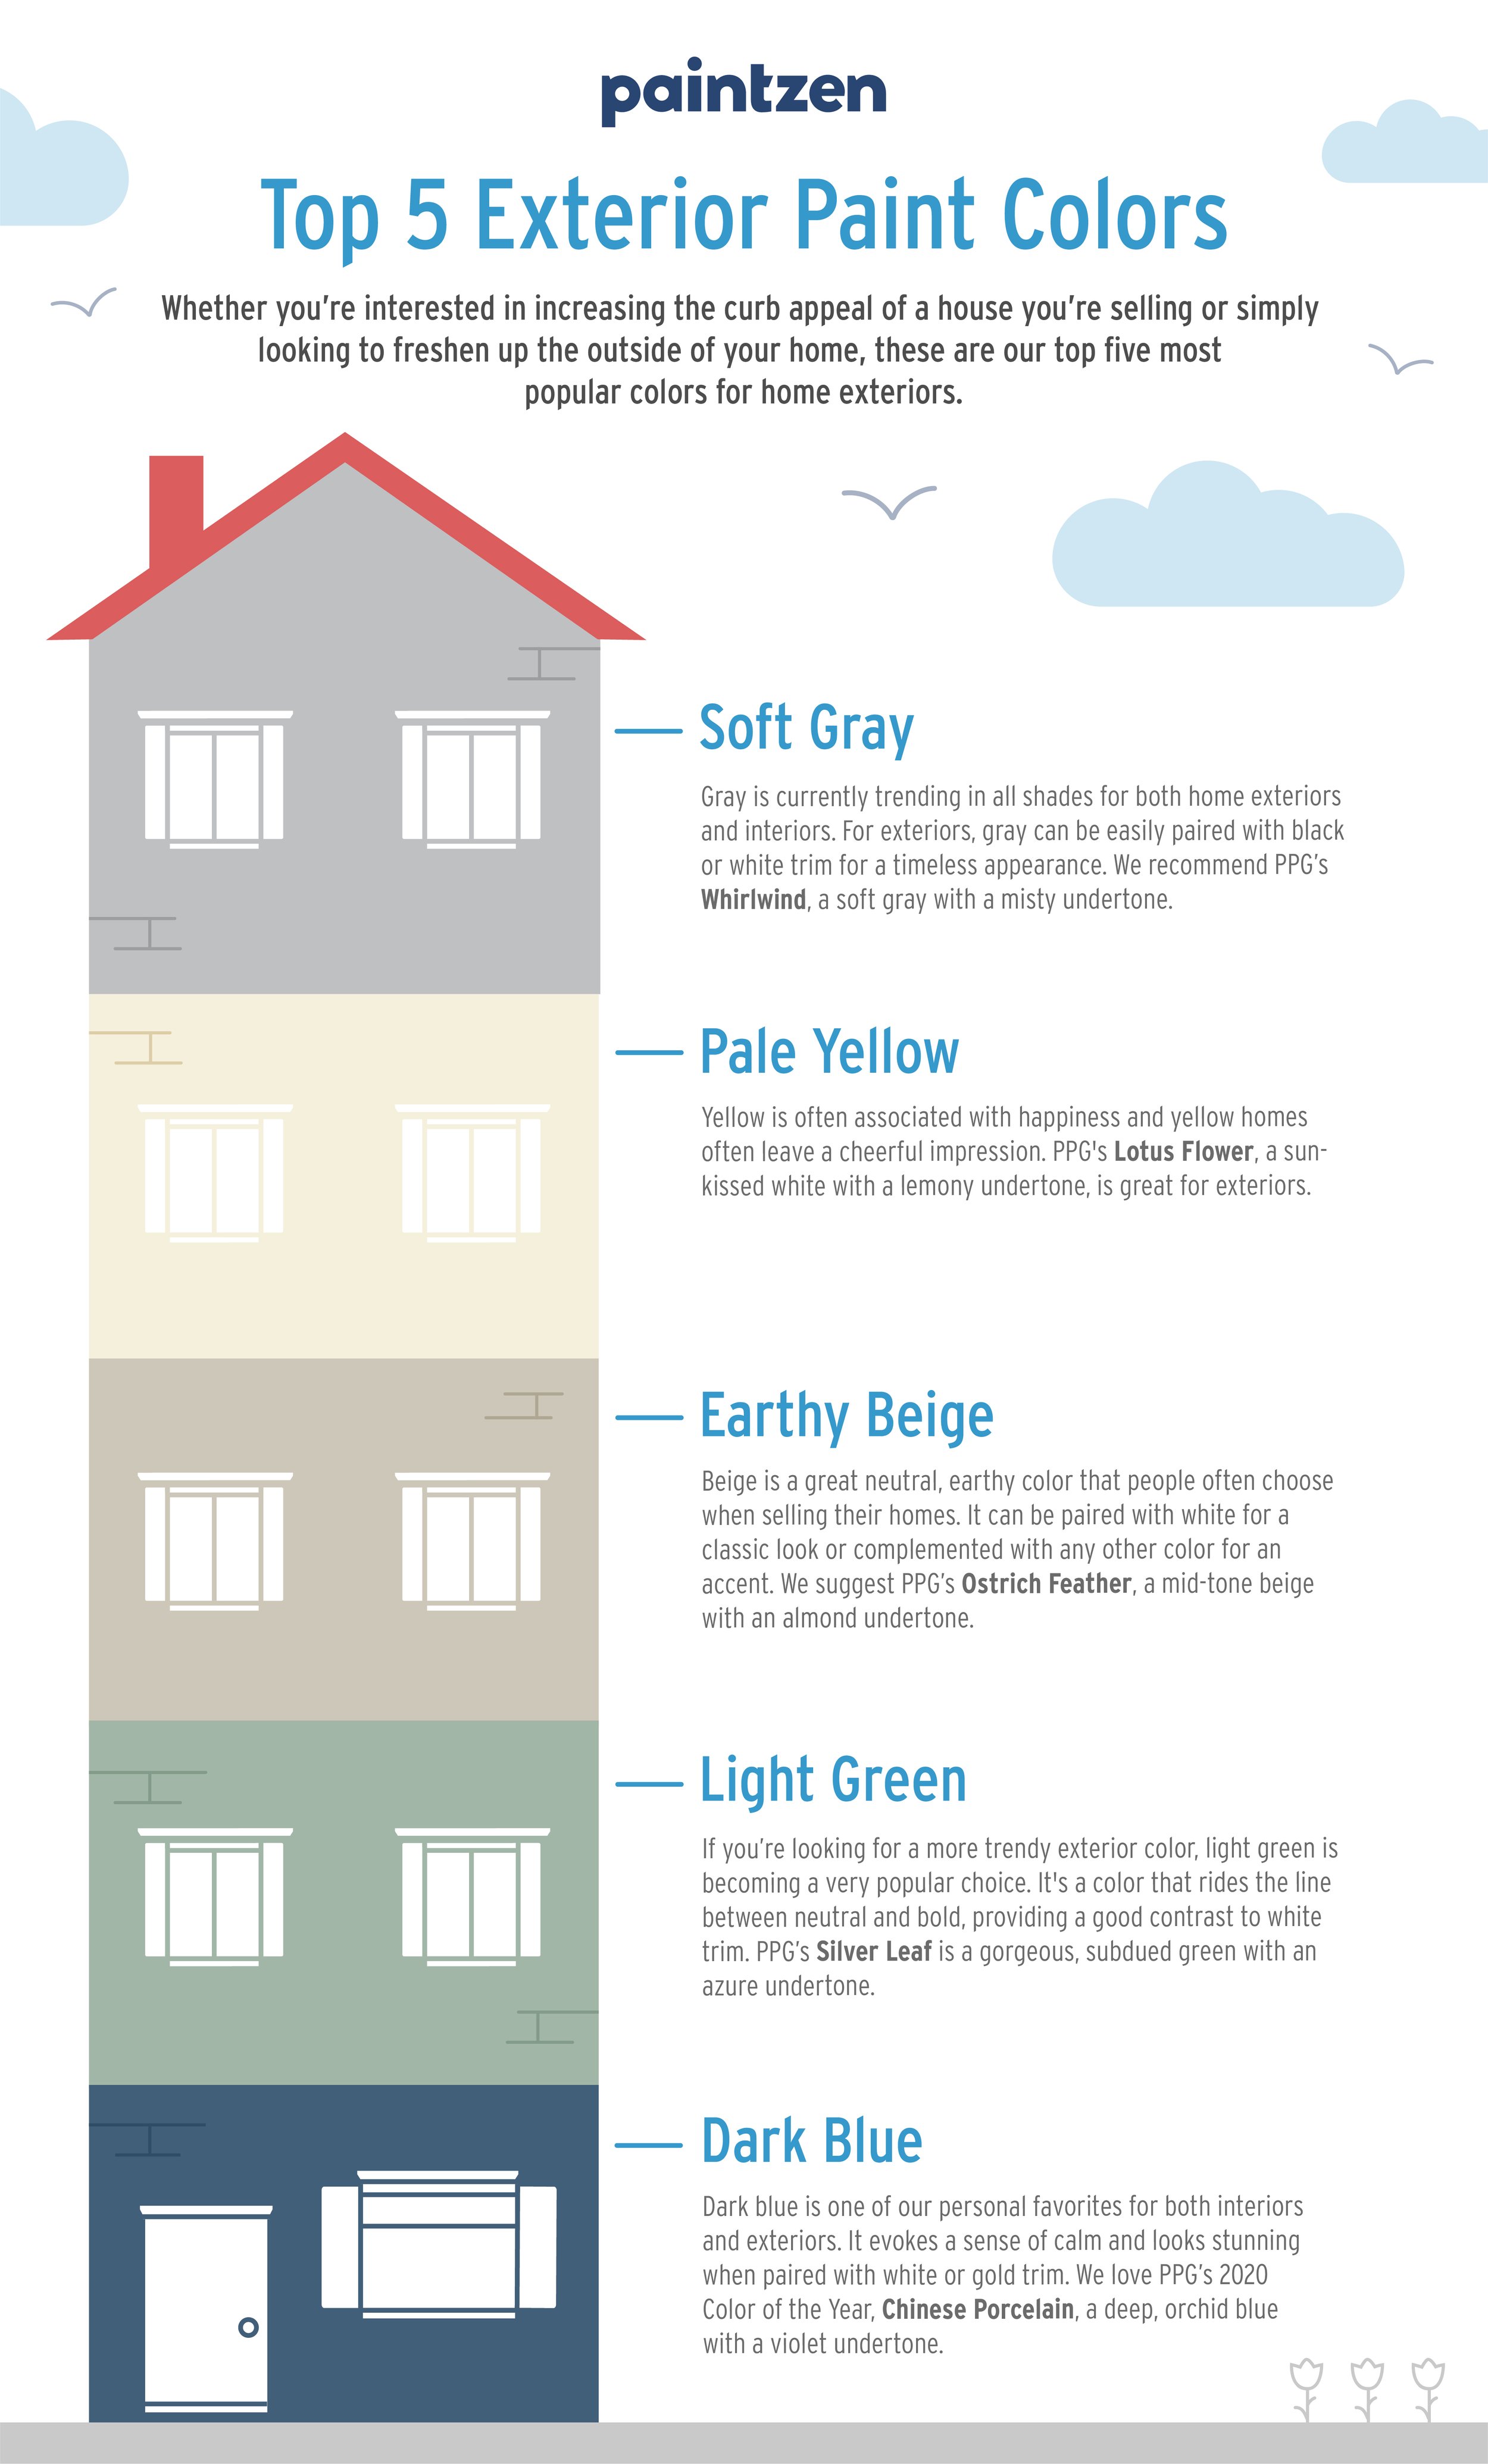 Marketing_Top 5 Exterior paint colors InfoGraphic_7-22-2019.jpg